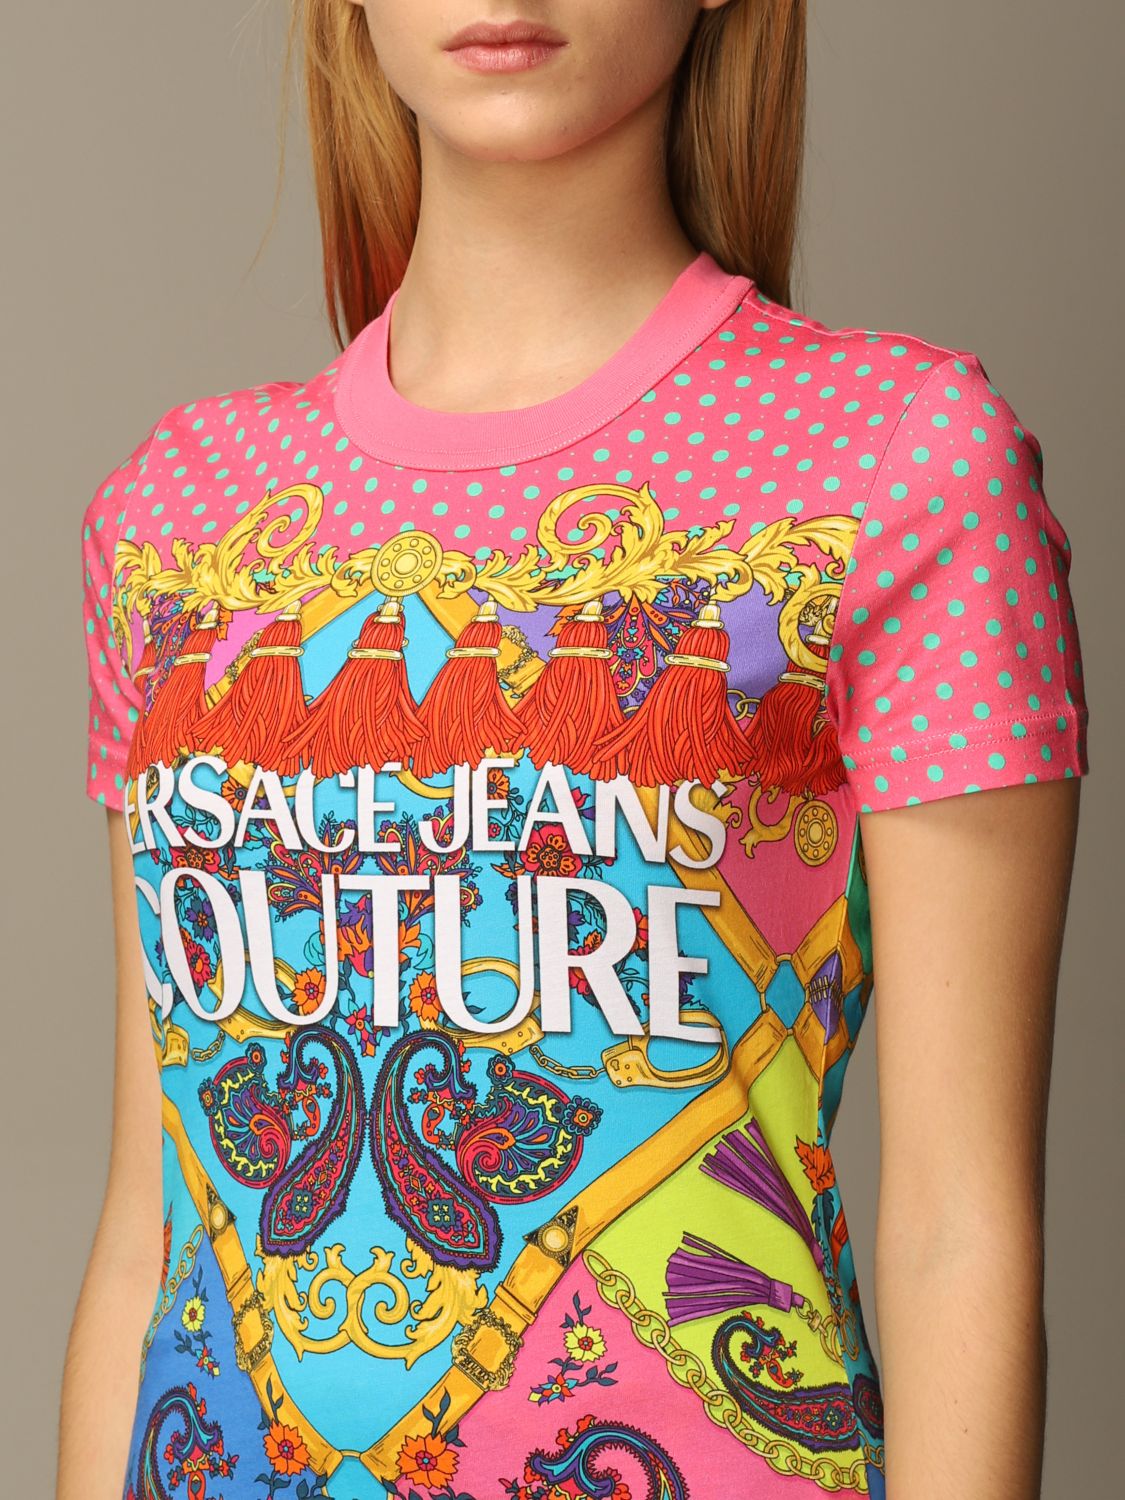 VERSACE JEANS COUTURE: t-shirt in fantasy paisley fabric | T-Shirt